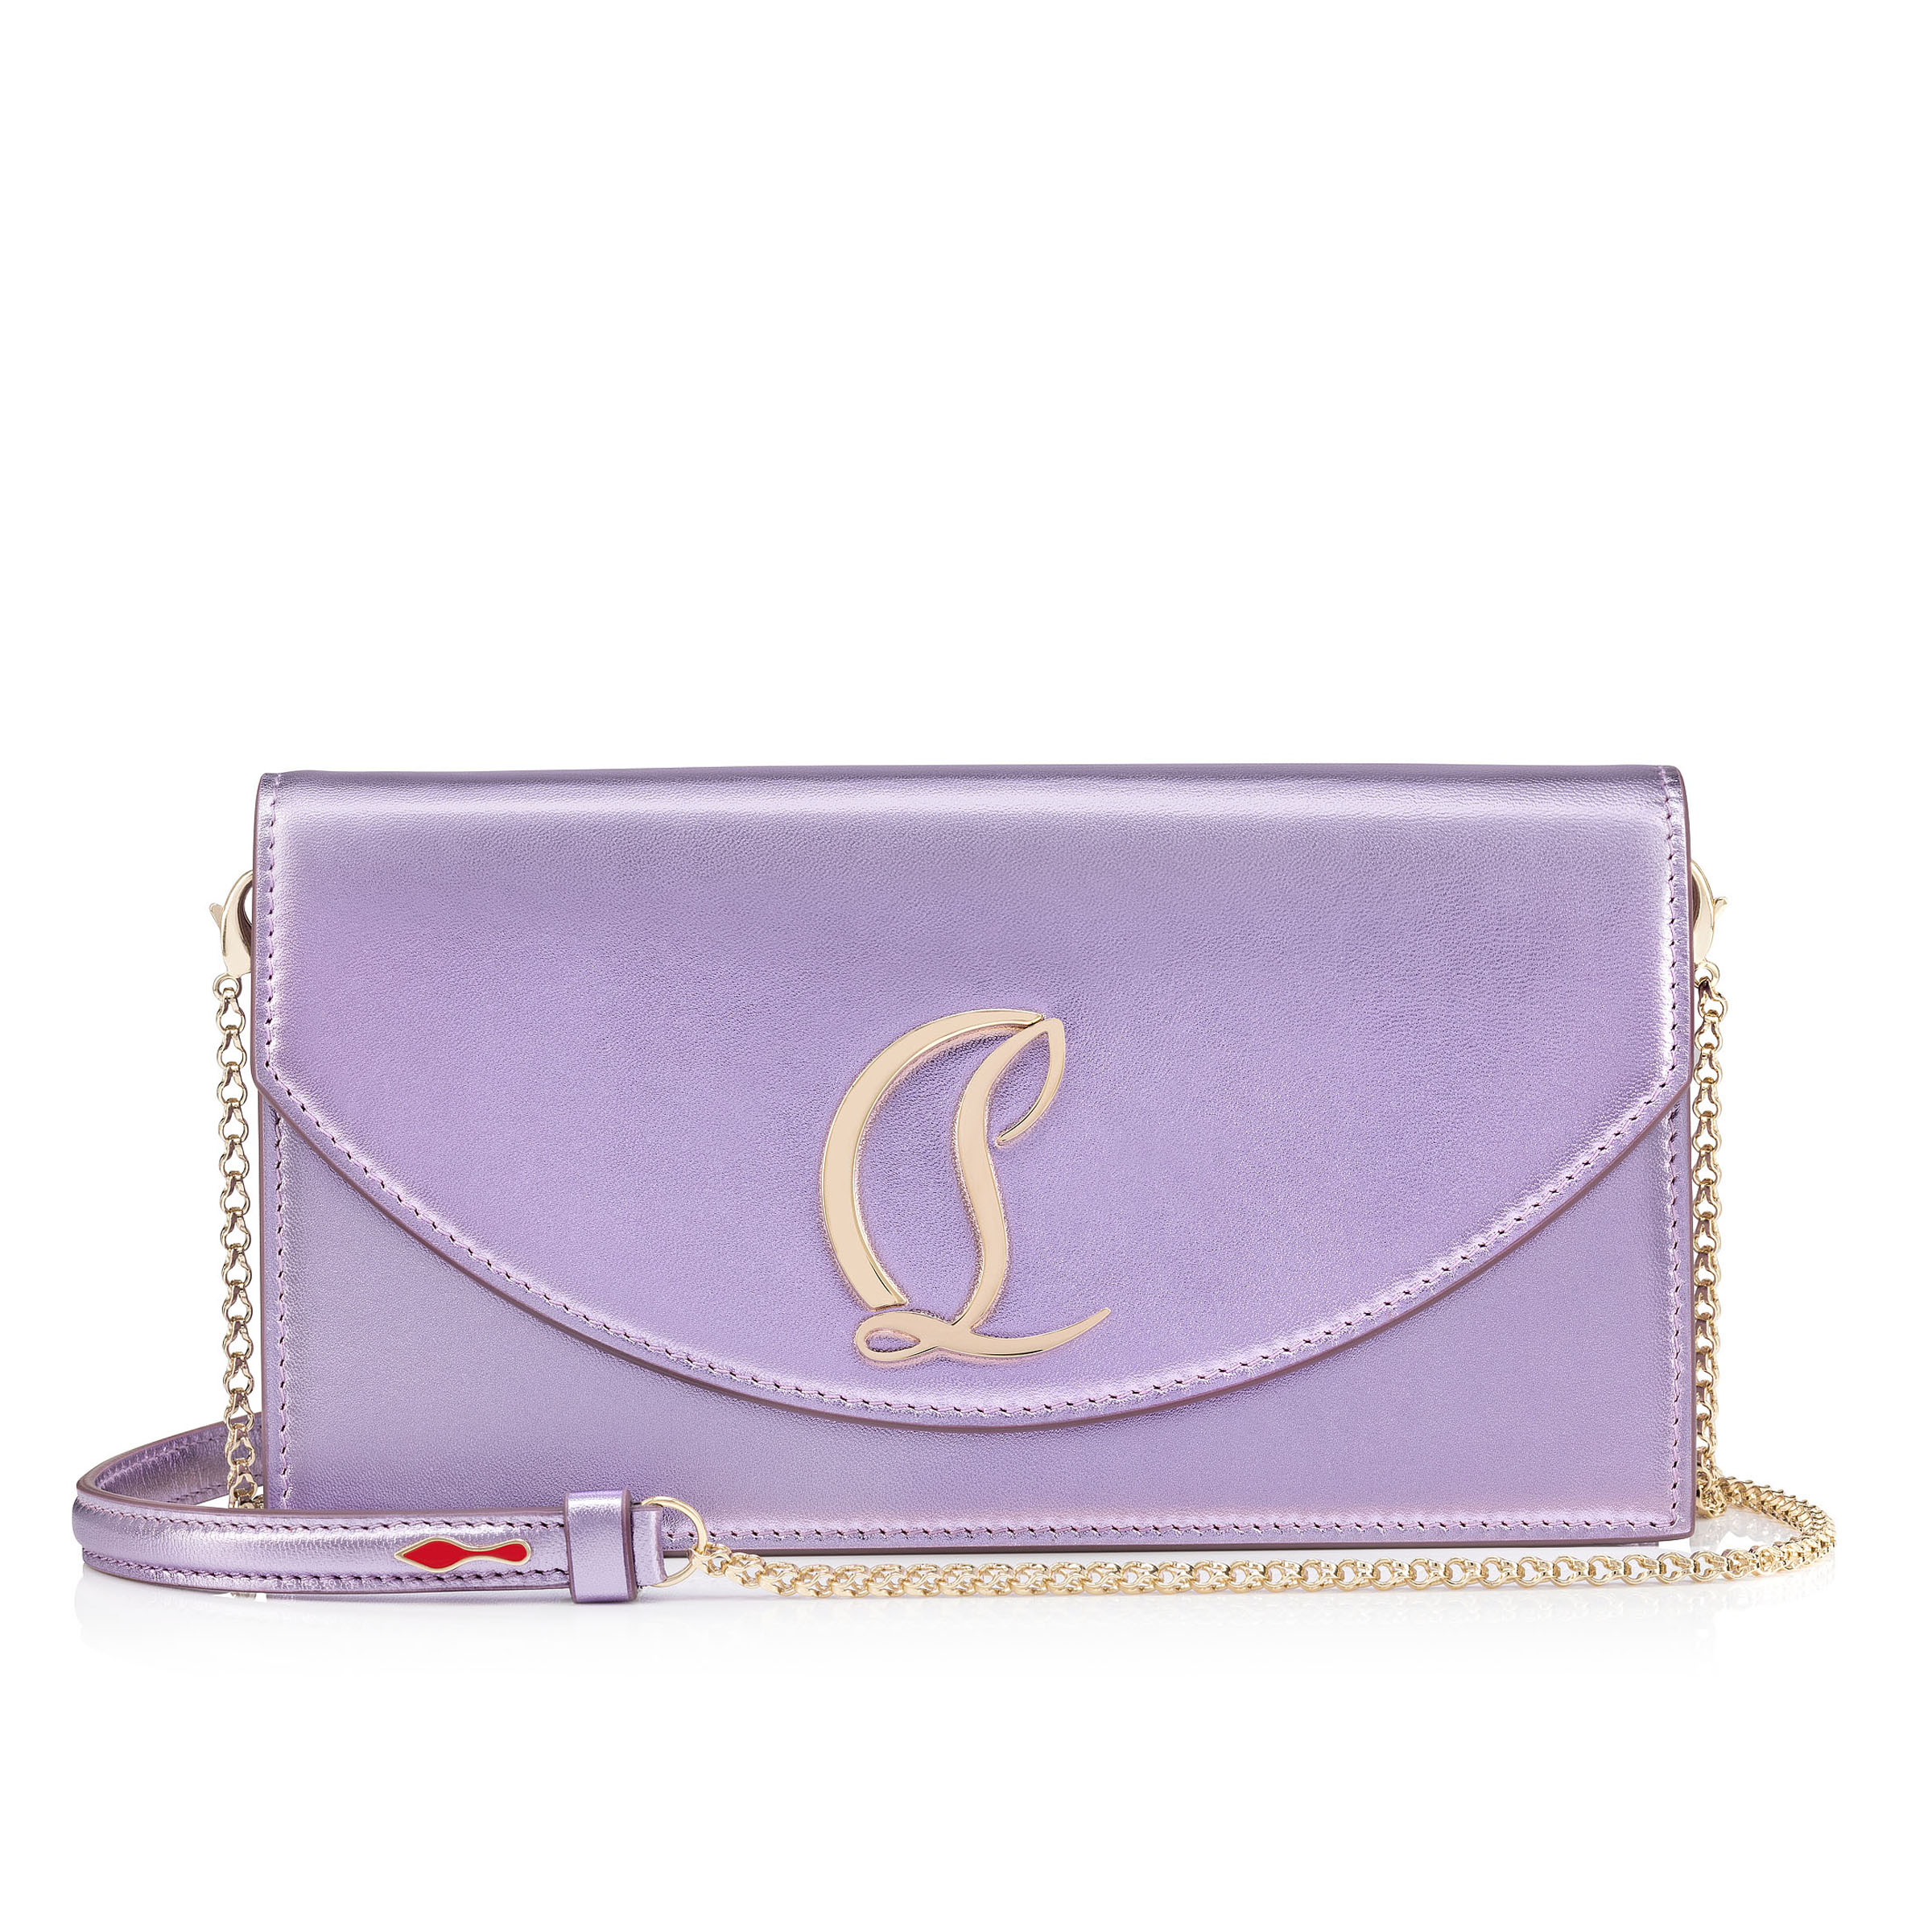 Loubi54 - Clutch - Iridescent nappa leather - Parme - Christian ...